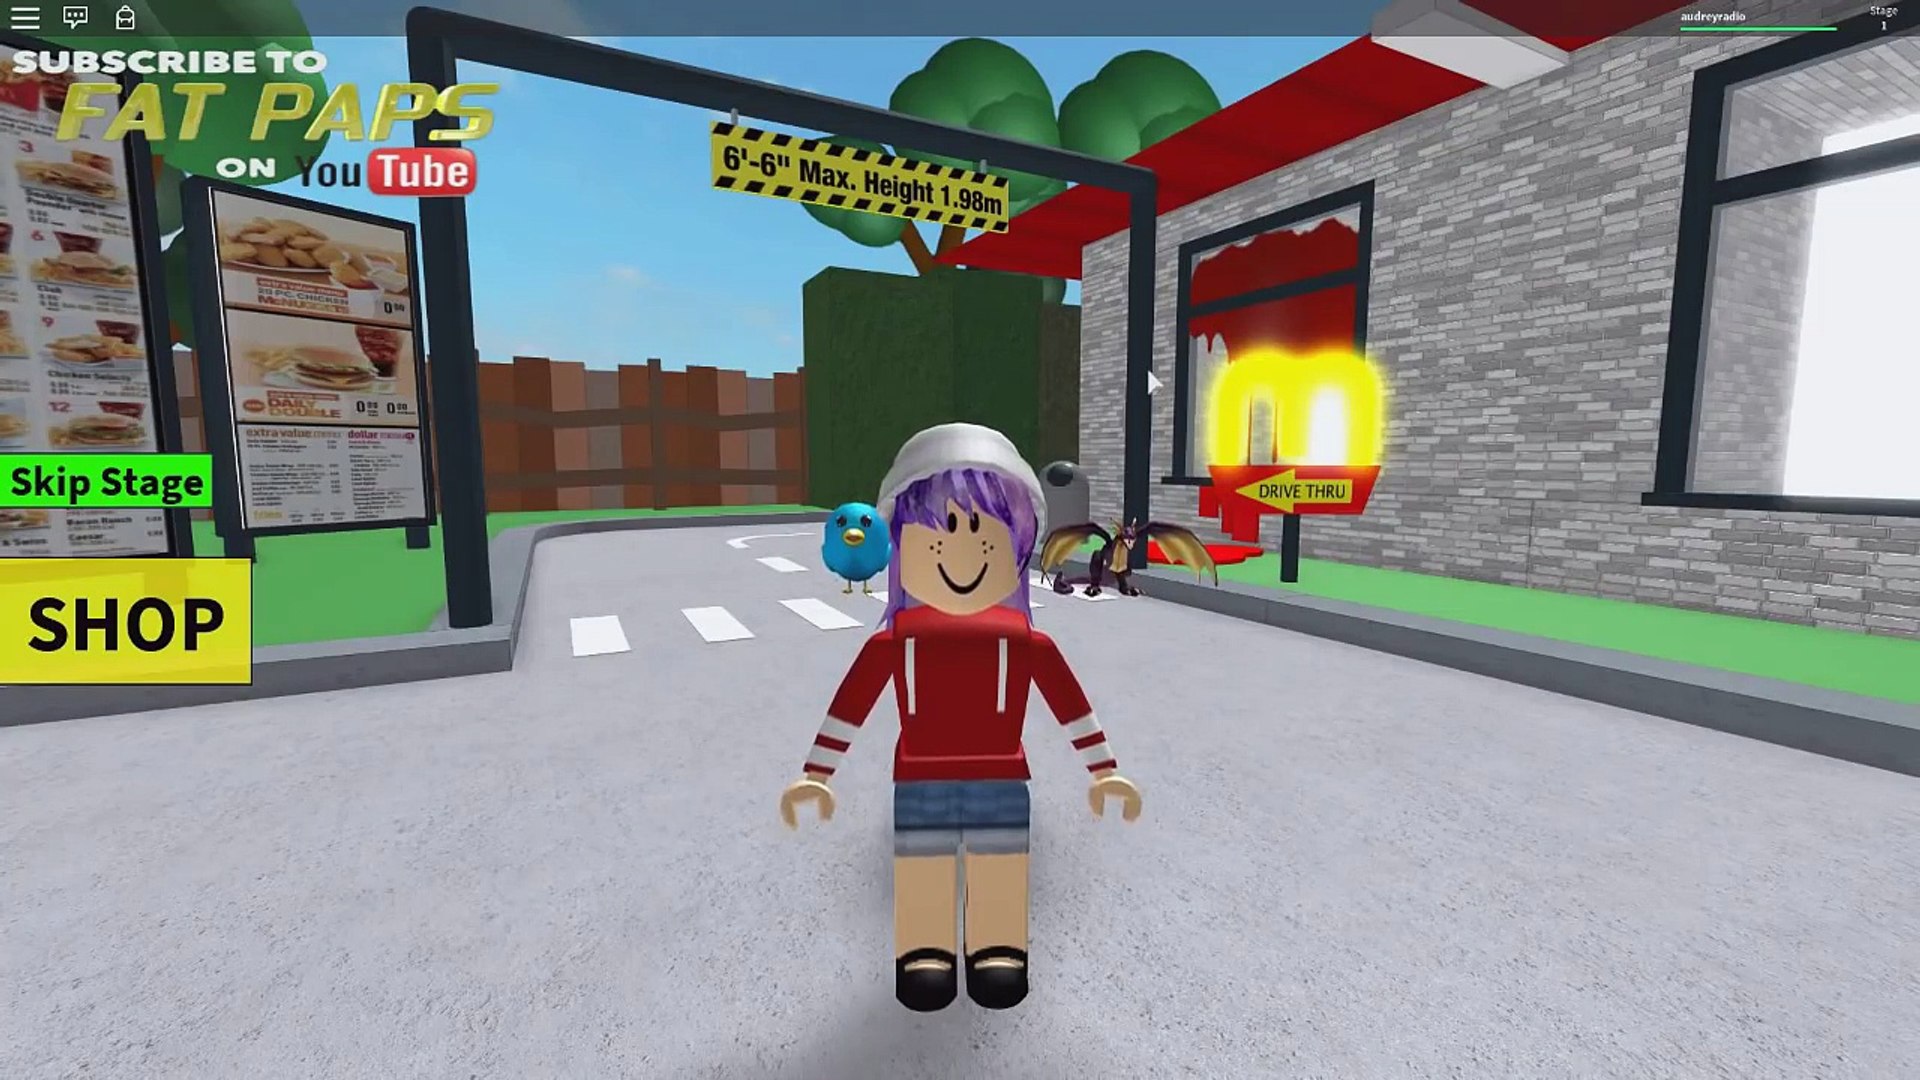 Roblox Lets Play Escape The Fast Food Place Obby Radiojh Games 影片 Dailymotion - roblox obby obby obby